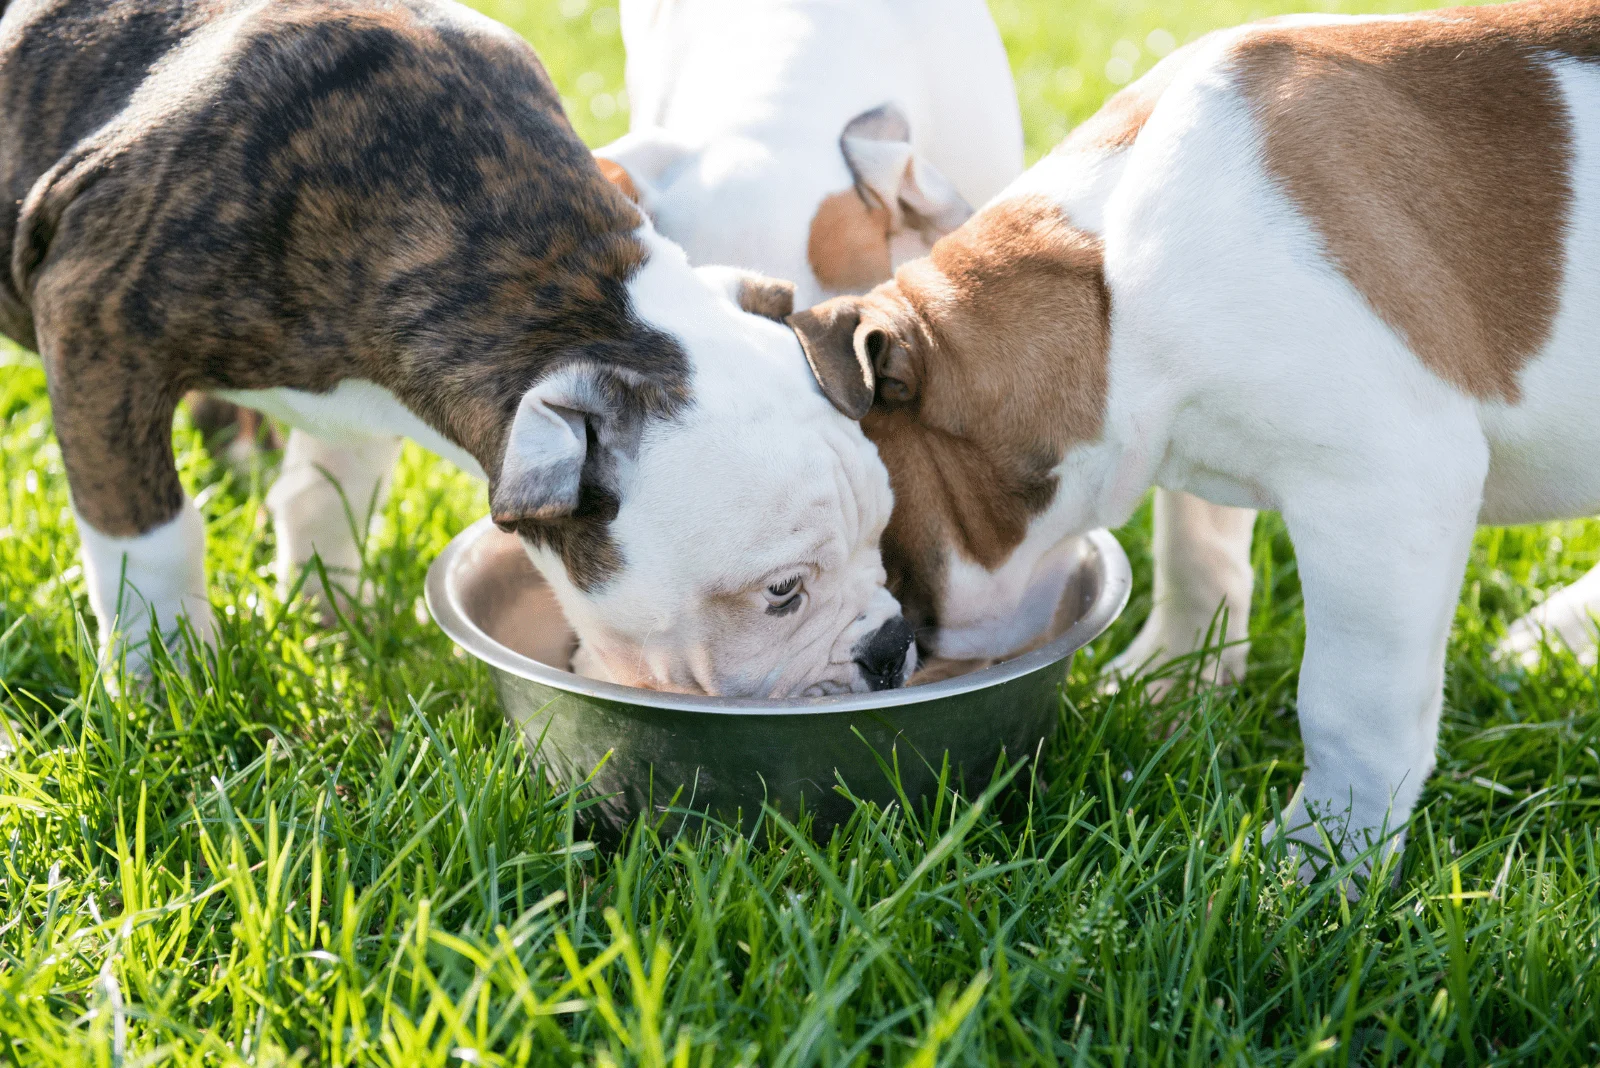 American Bulldog puppies eat from a bowl